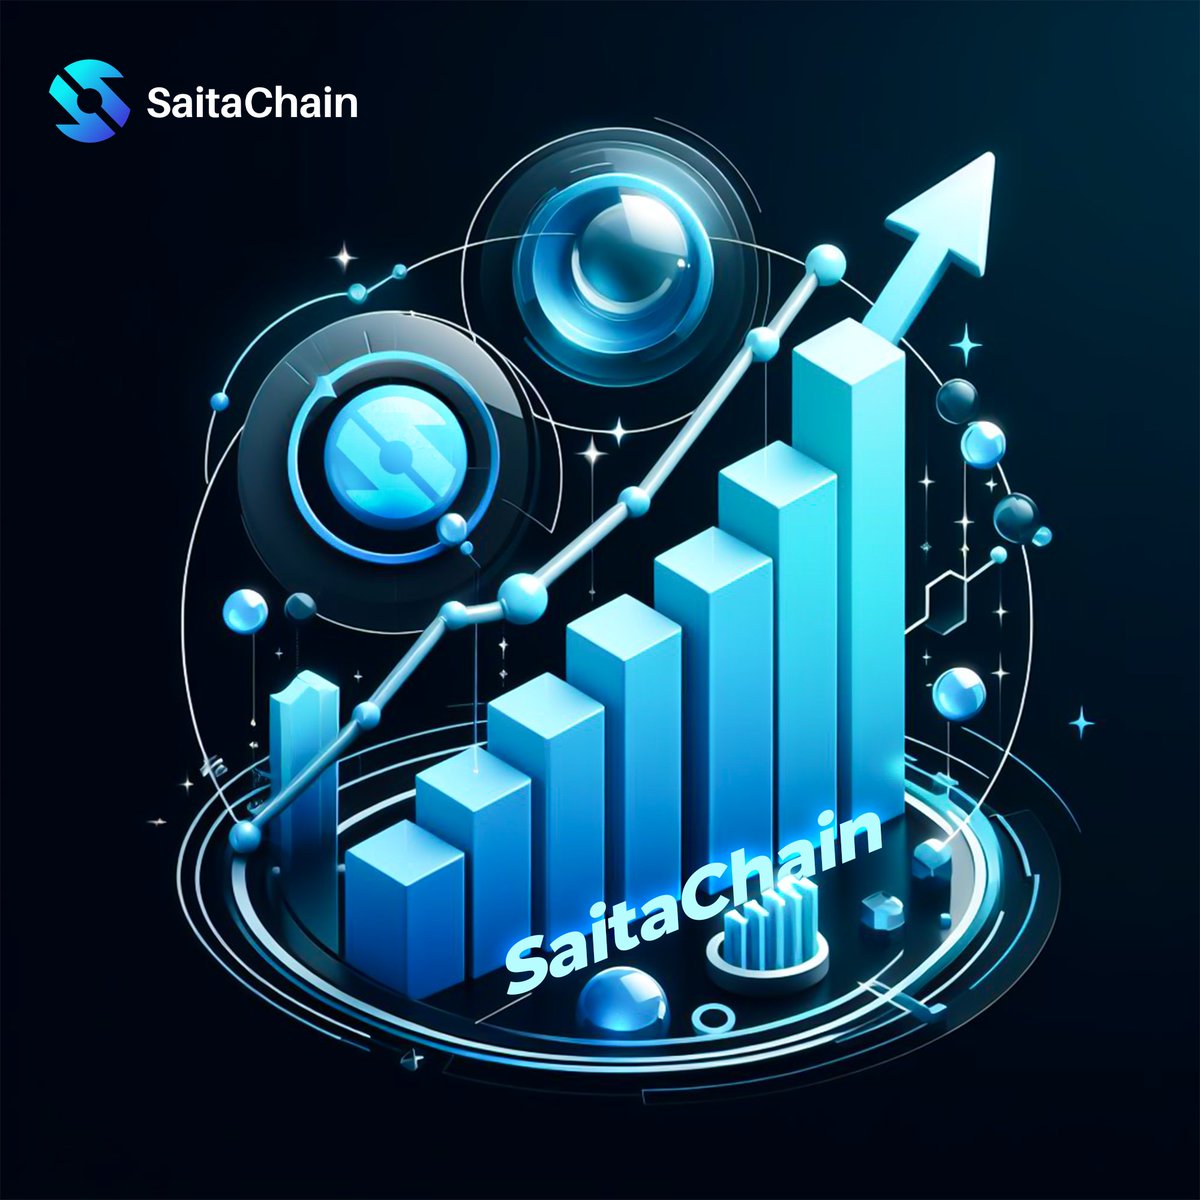 #SaitaCommunity is a resilient community built on trust in its investments and the #Saita Dev Team. With such confidence, great results are surely just around the corner!' 🌟💪
#STC $STC #SaitaChain

#SaitaRealty #SaitaPro #SaitaSwap #XBridge #Crypto #Cryptocurency #US #USA